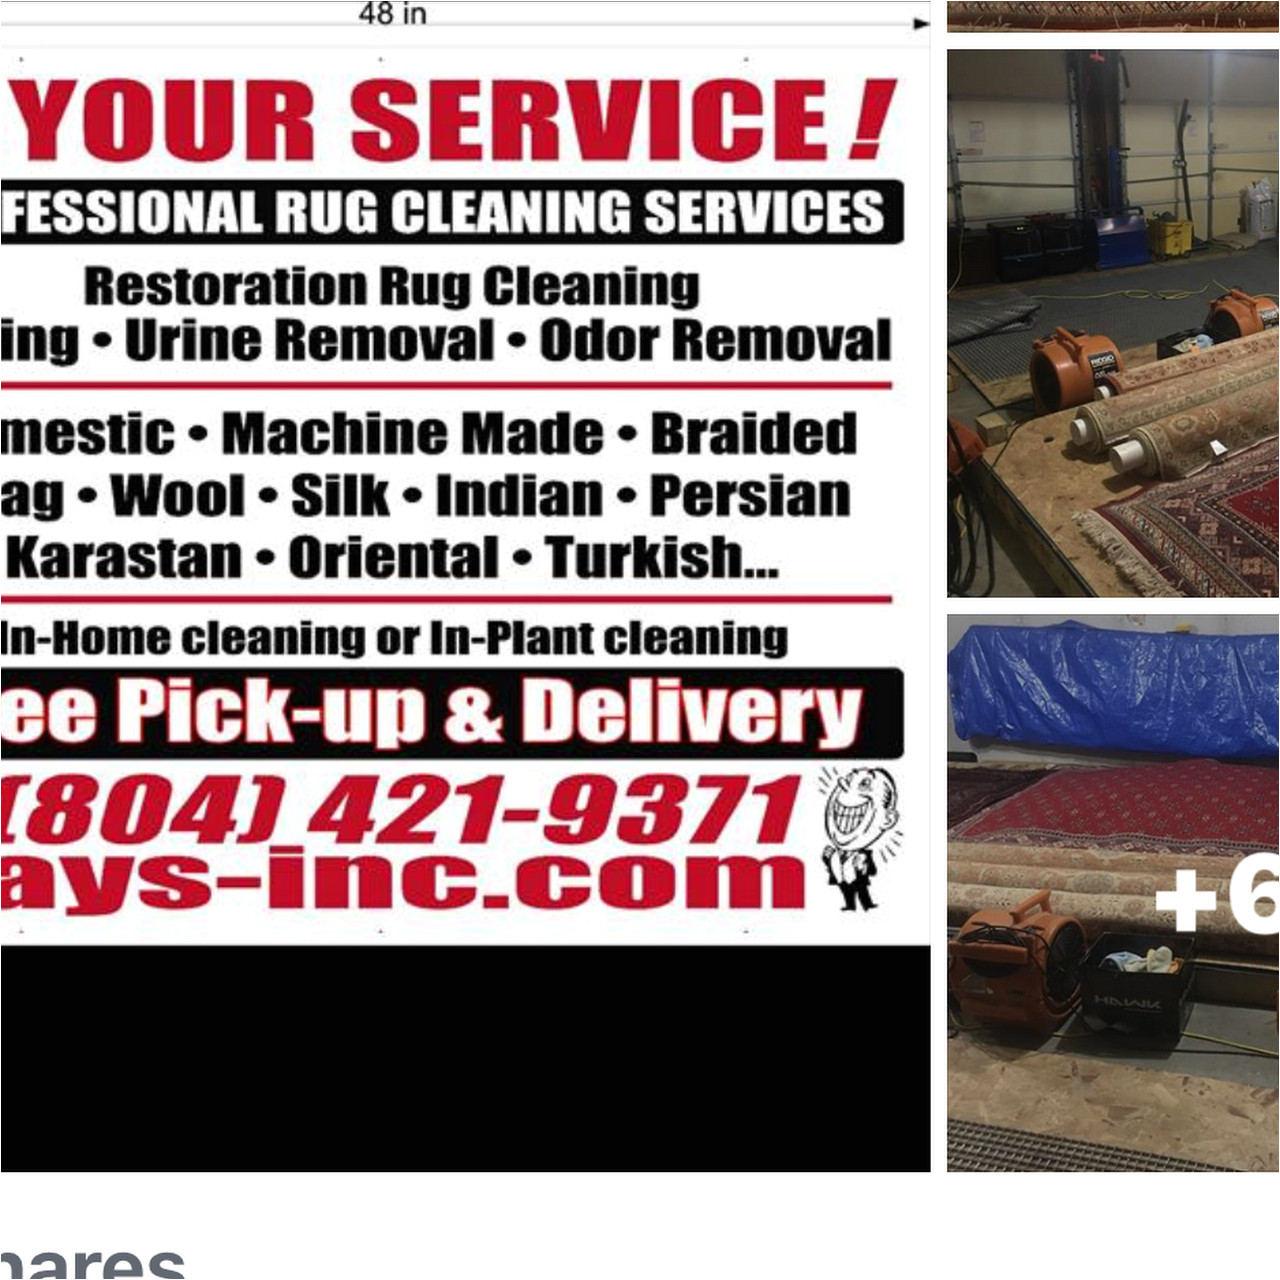 posted on jul 10 2018 richmond s affordable professional rug cleaning